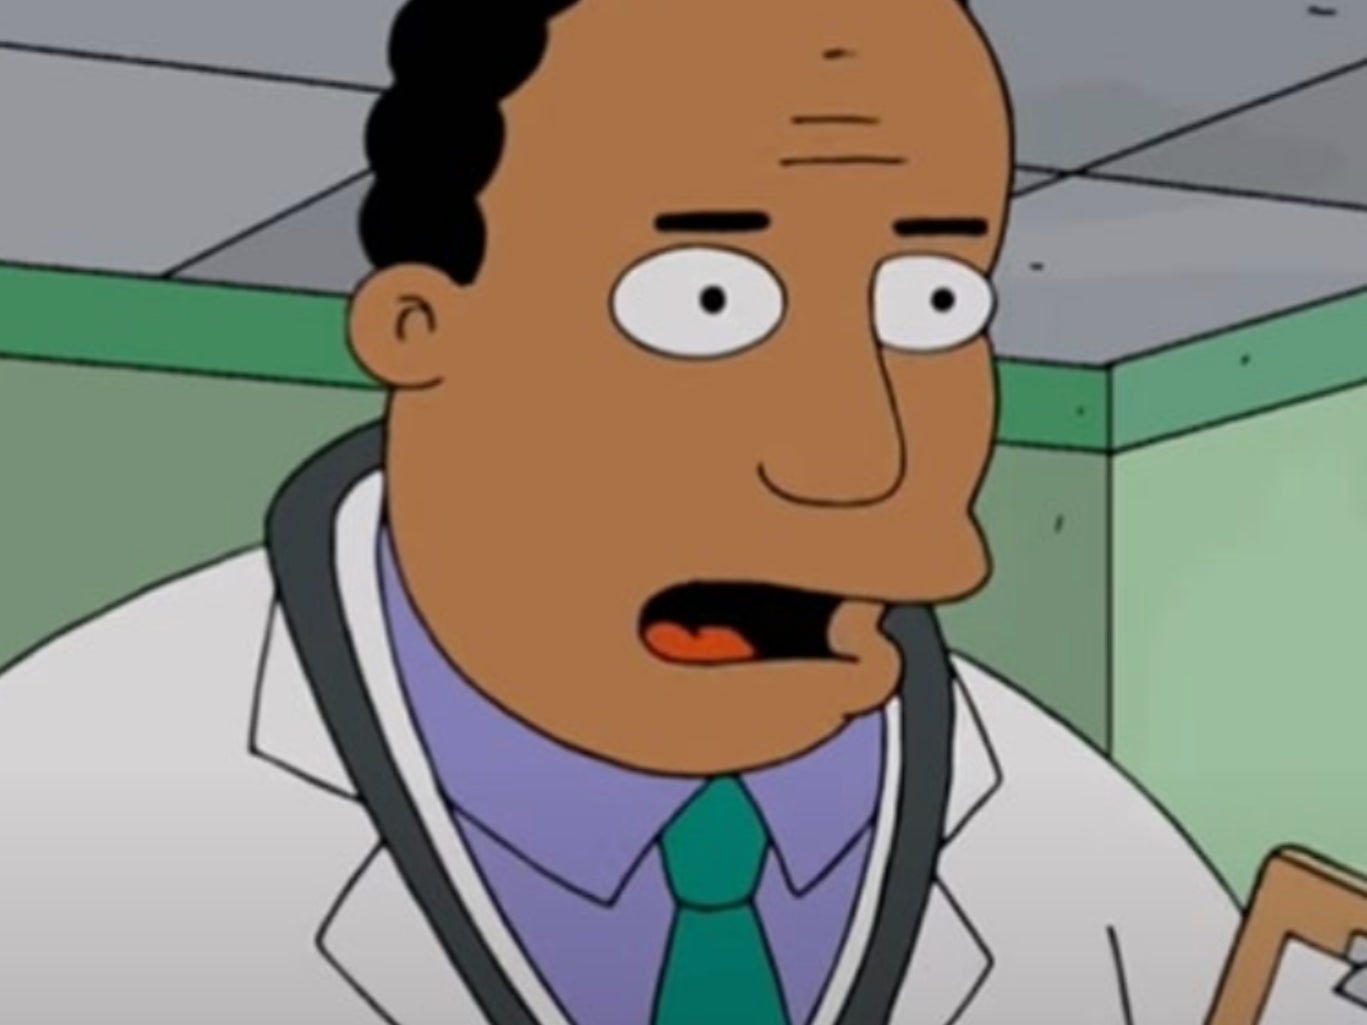 ‘The Simpsons’ character Dr Hibbert used to be voiced by Harry Shearer